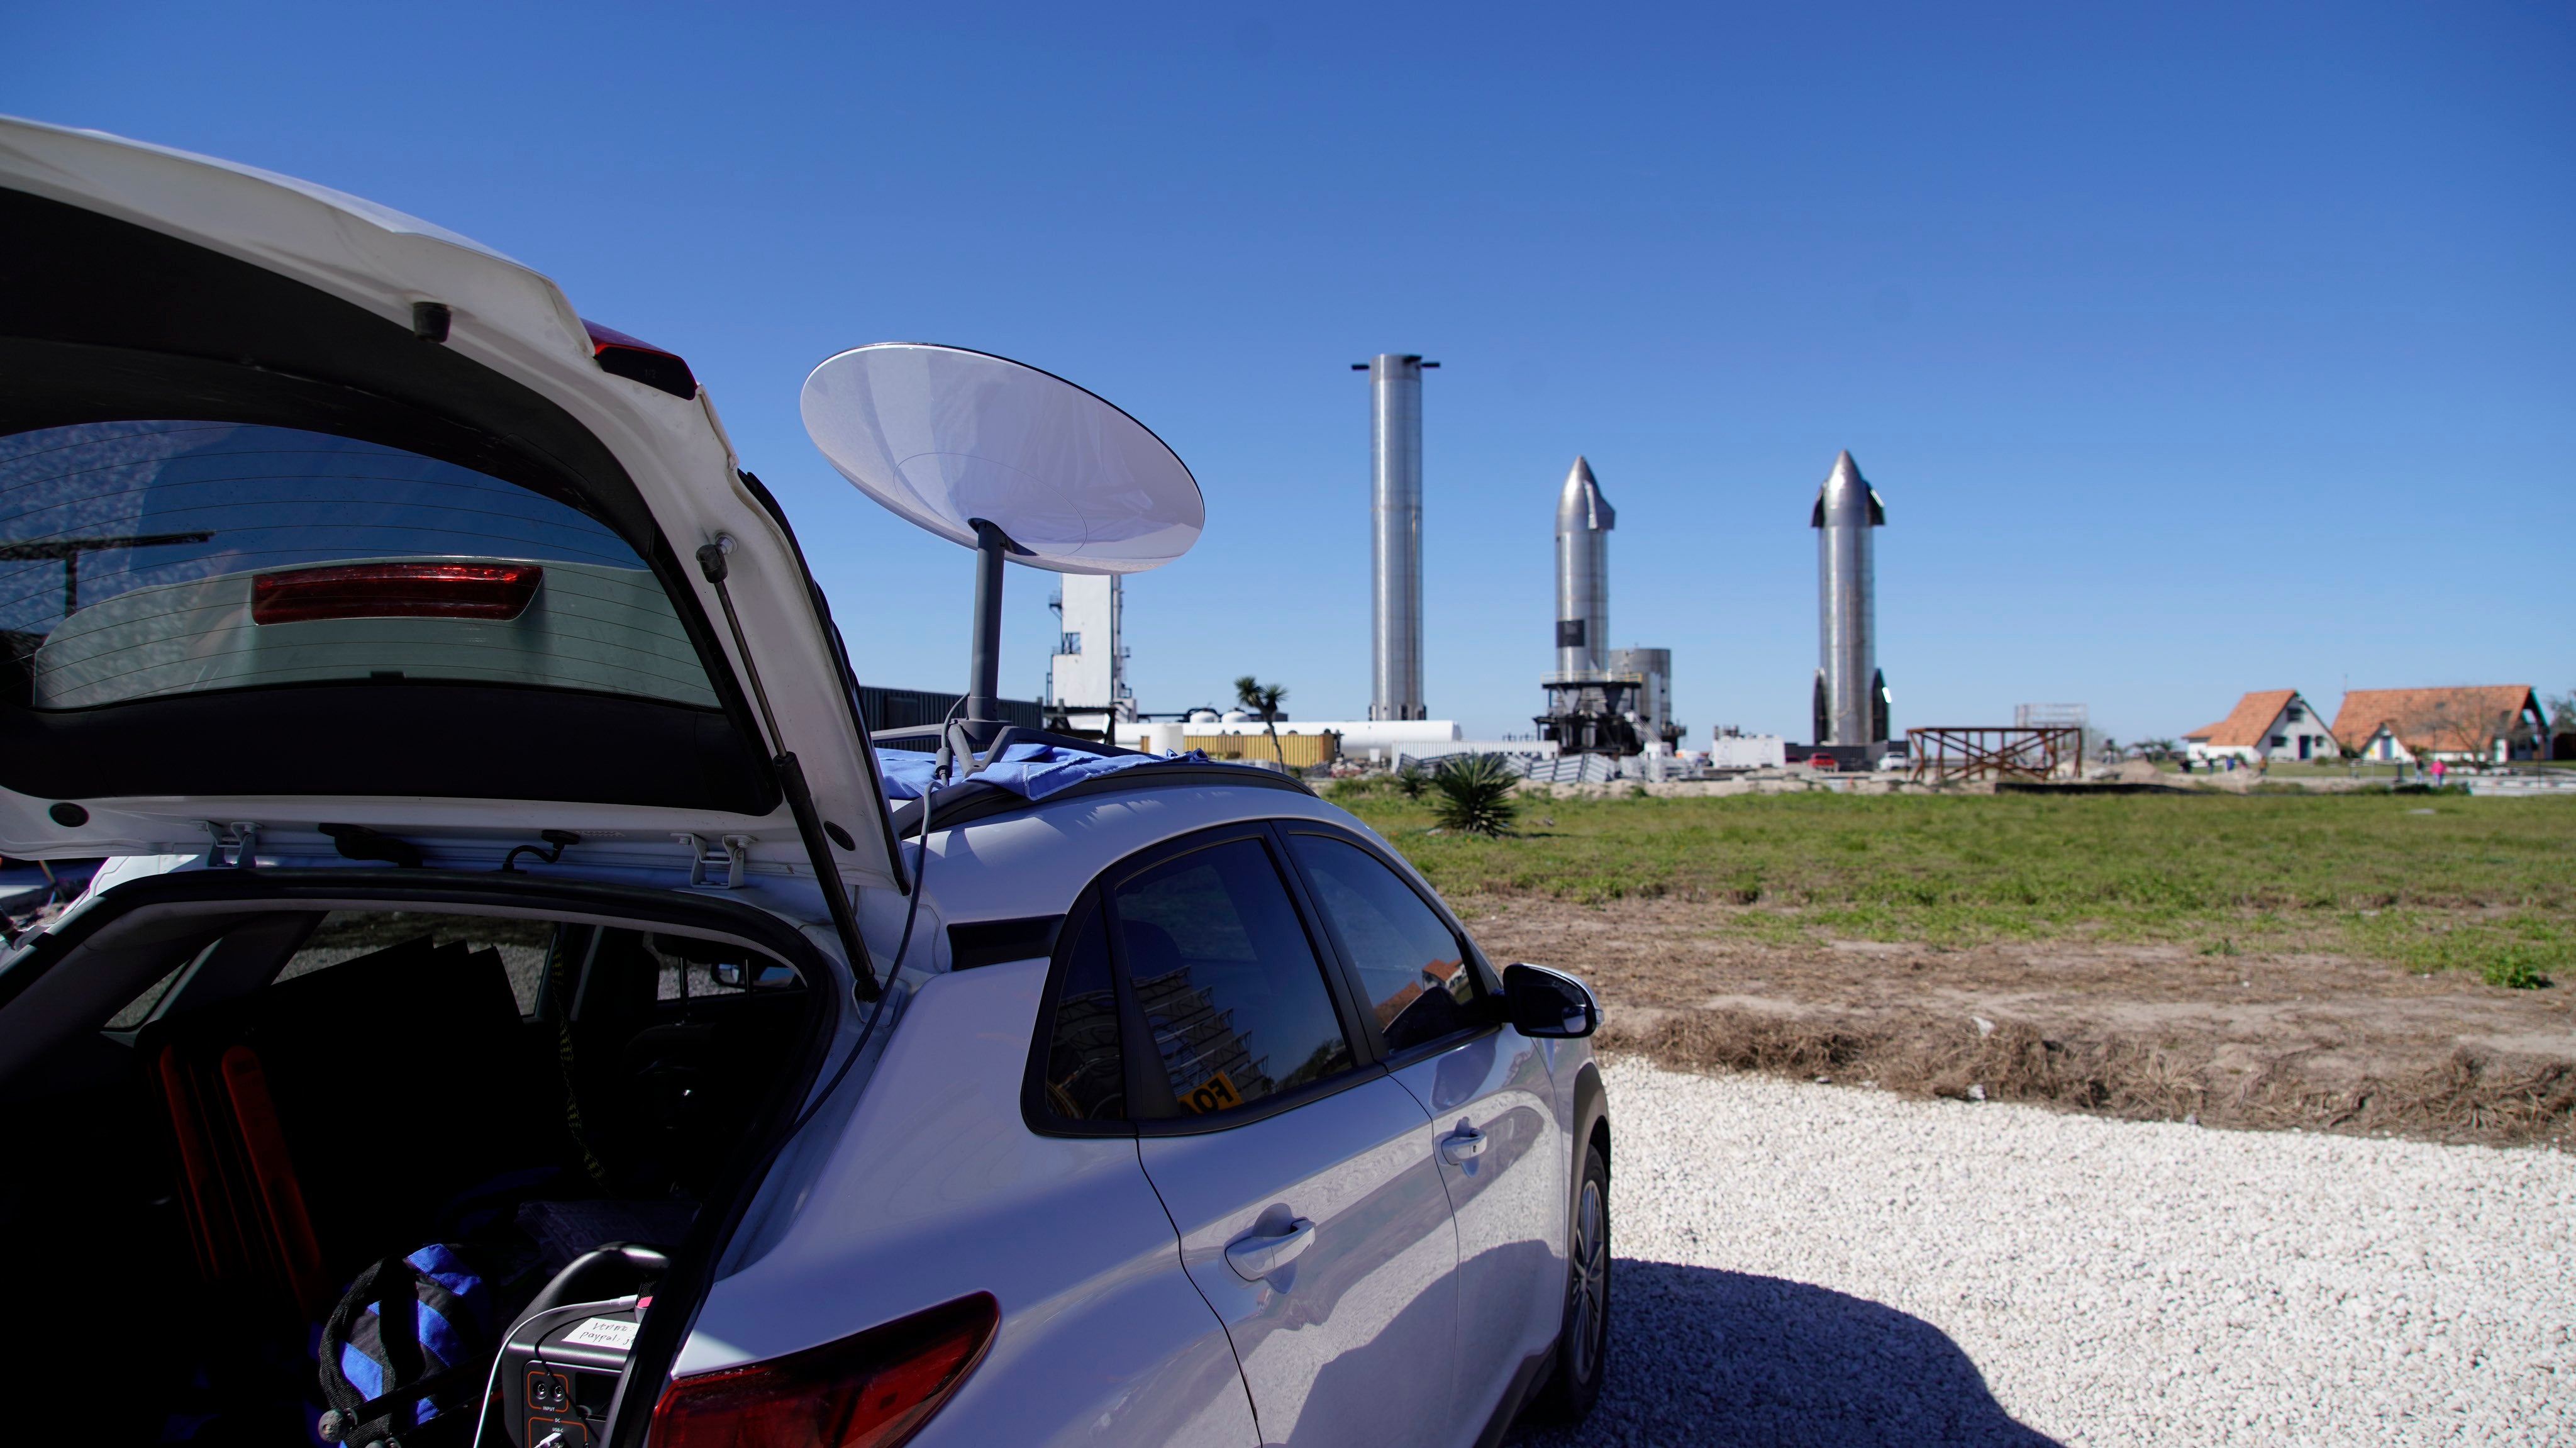 South Texas Resident Uses SpaceX Starlink Internet At Starbase Starship Launch Site